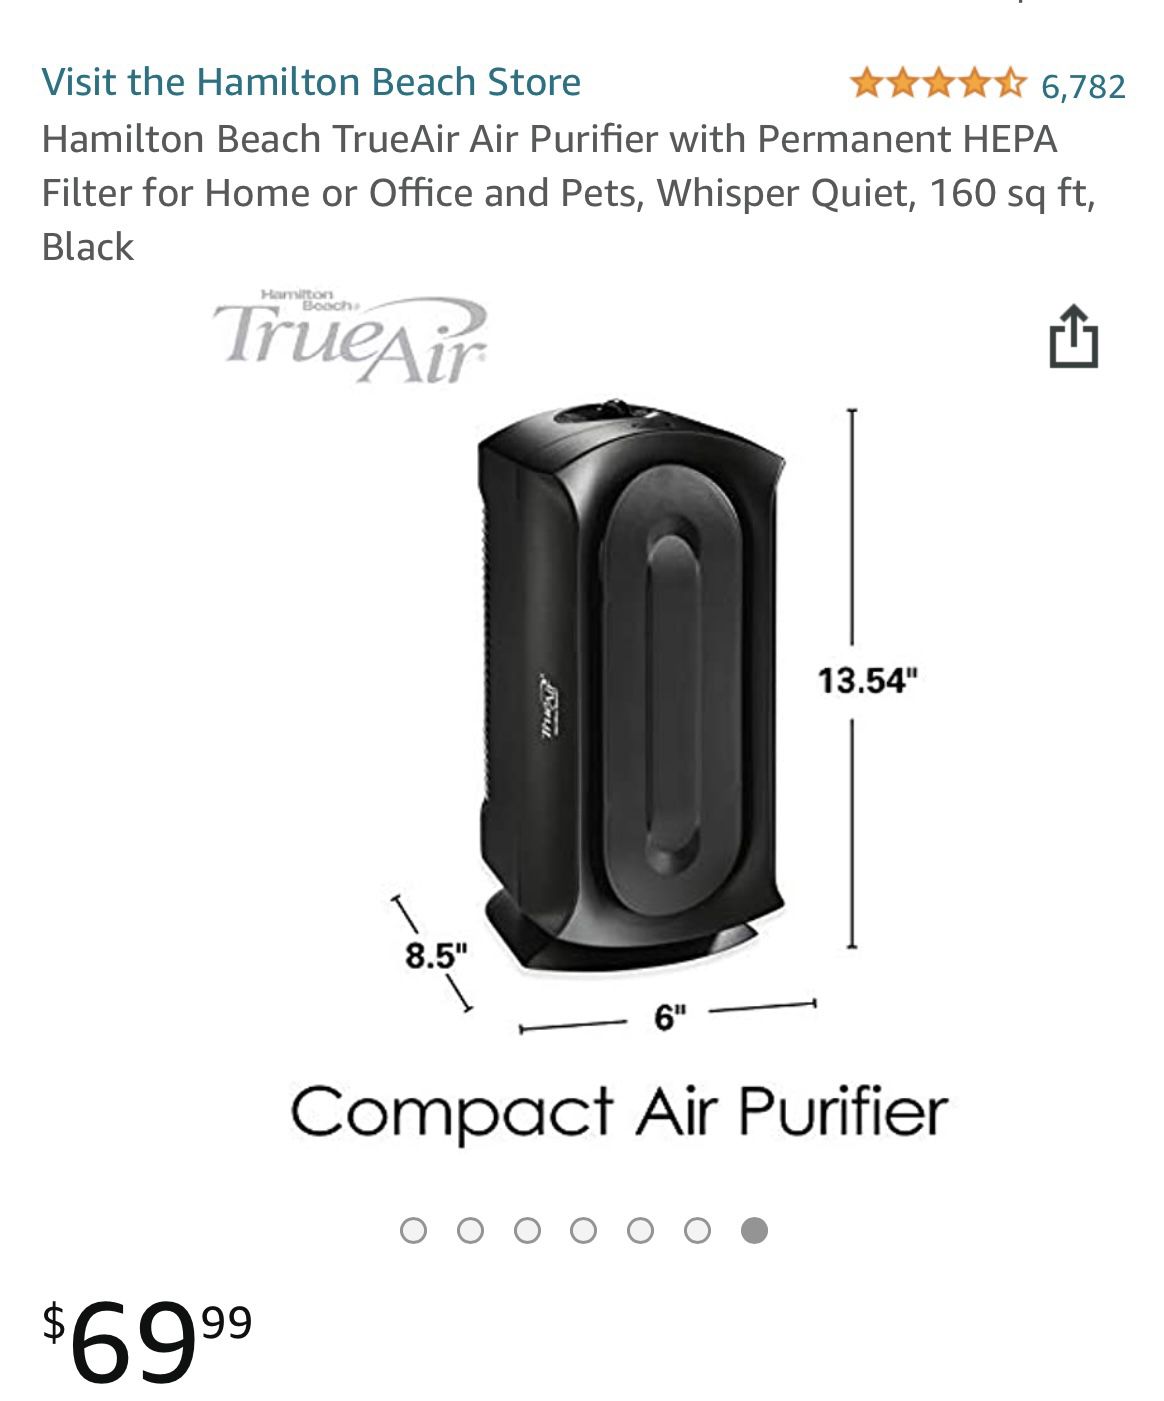 Hamilton Beach TrueAir Air Purifier with Permanent HEPA Filter for Home or Office and Pets, Whisper Quiet, 160 sq ft, Black